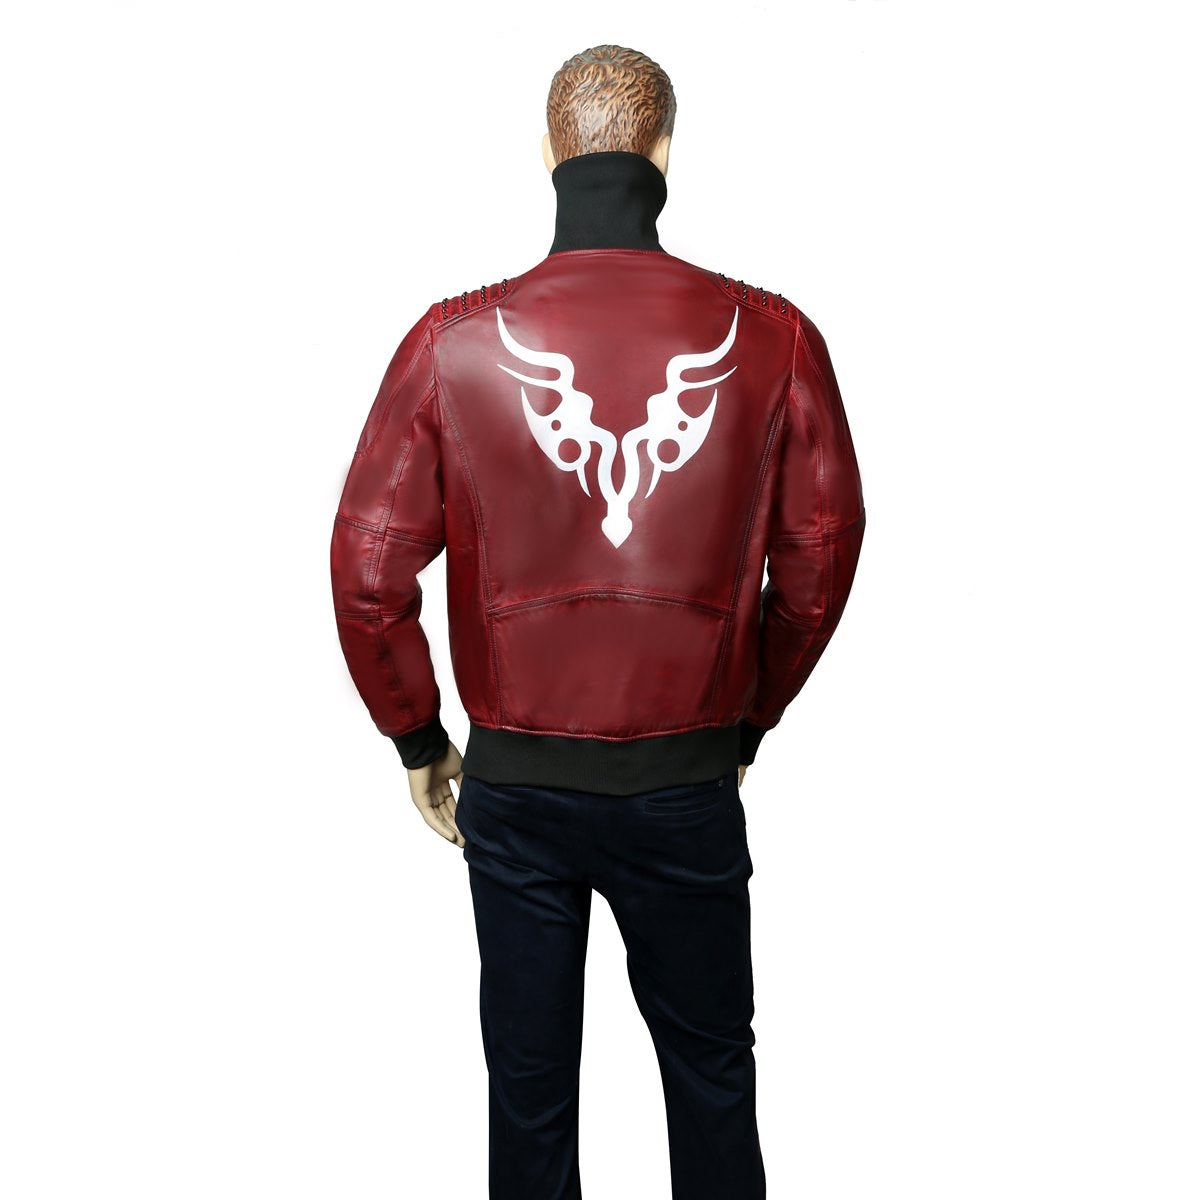 Bespoke Red Abstract Tribal Inspired Hand painting Leather Jacket with Black Stud For Men Brune & Bareskin